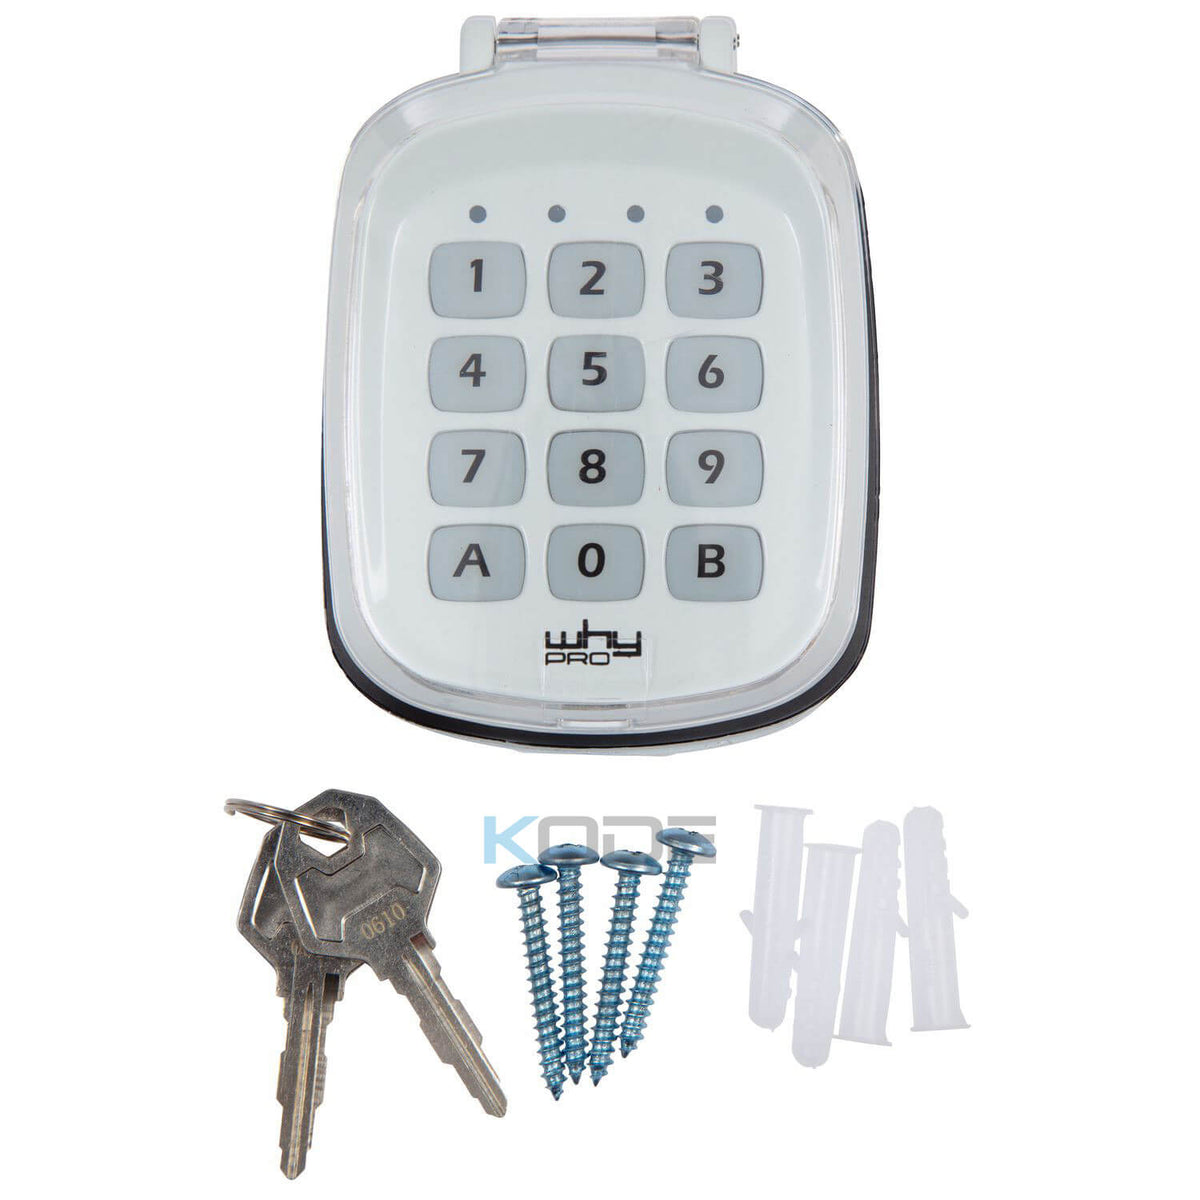 Why PRO Keypad with Accessories 